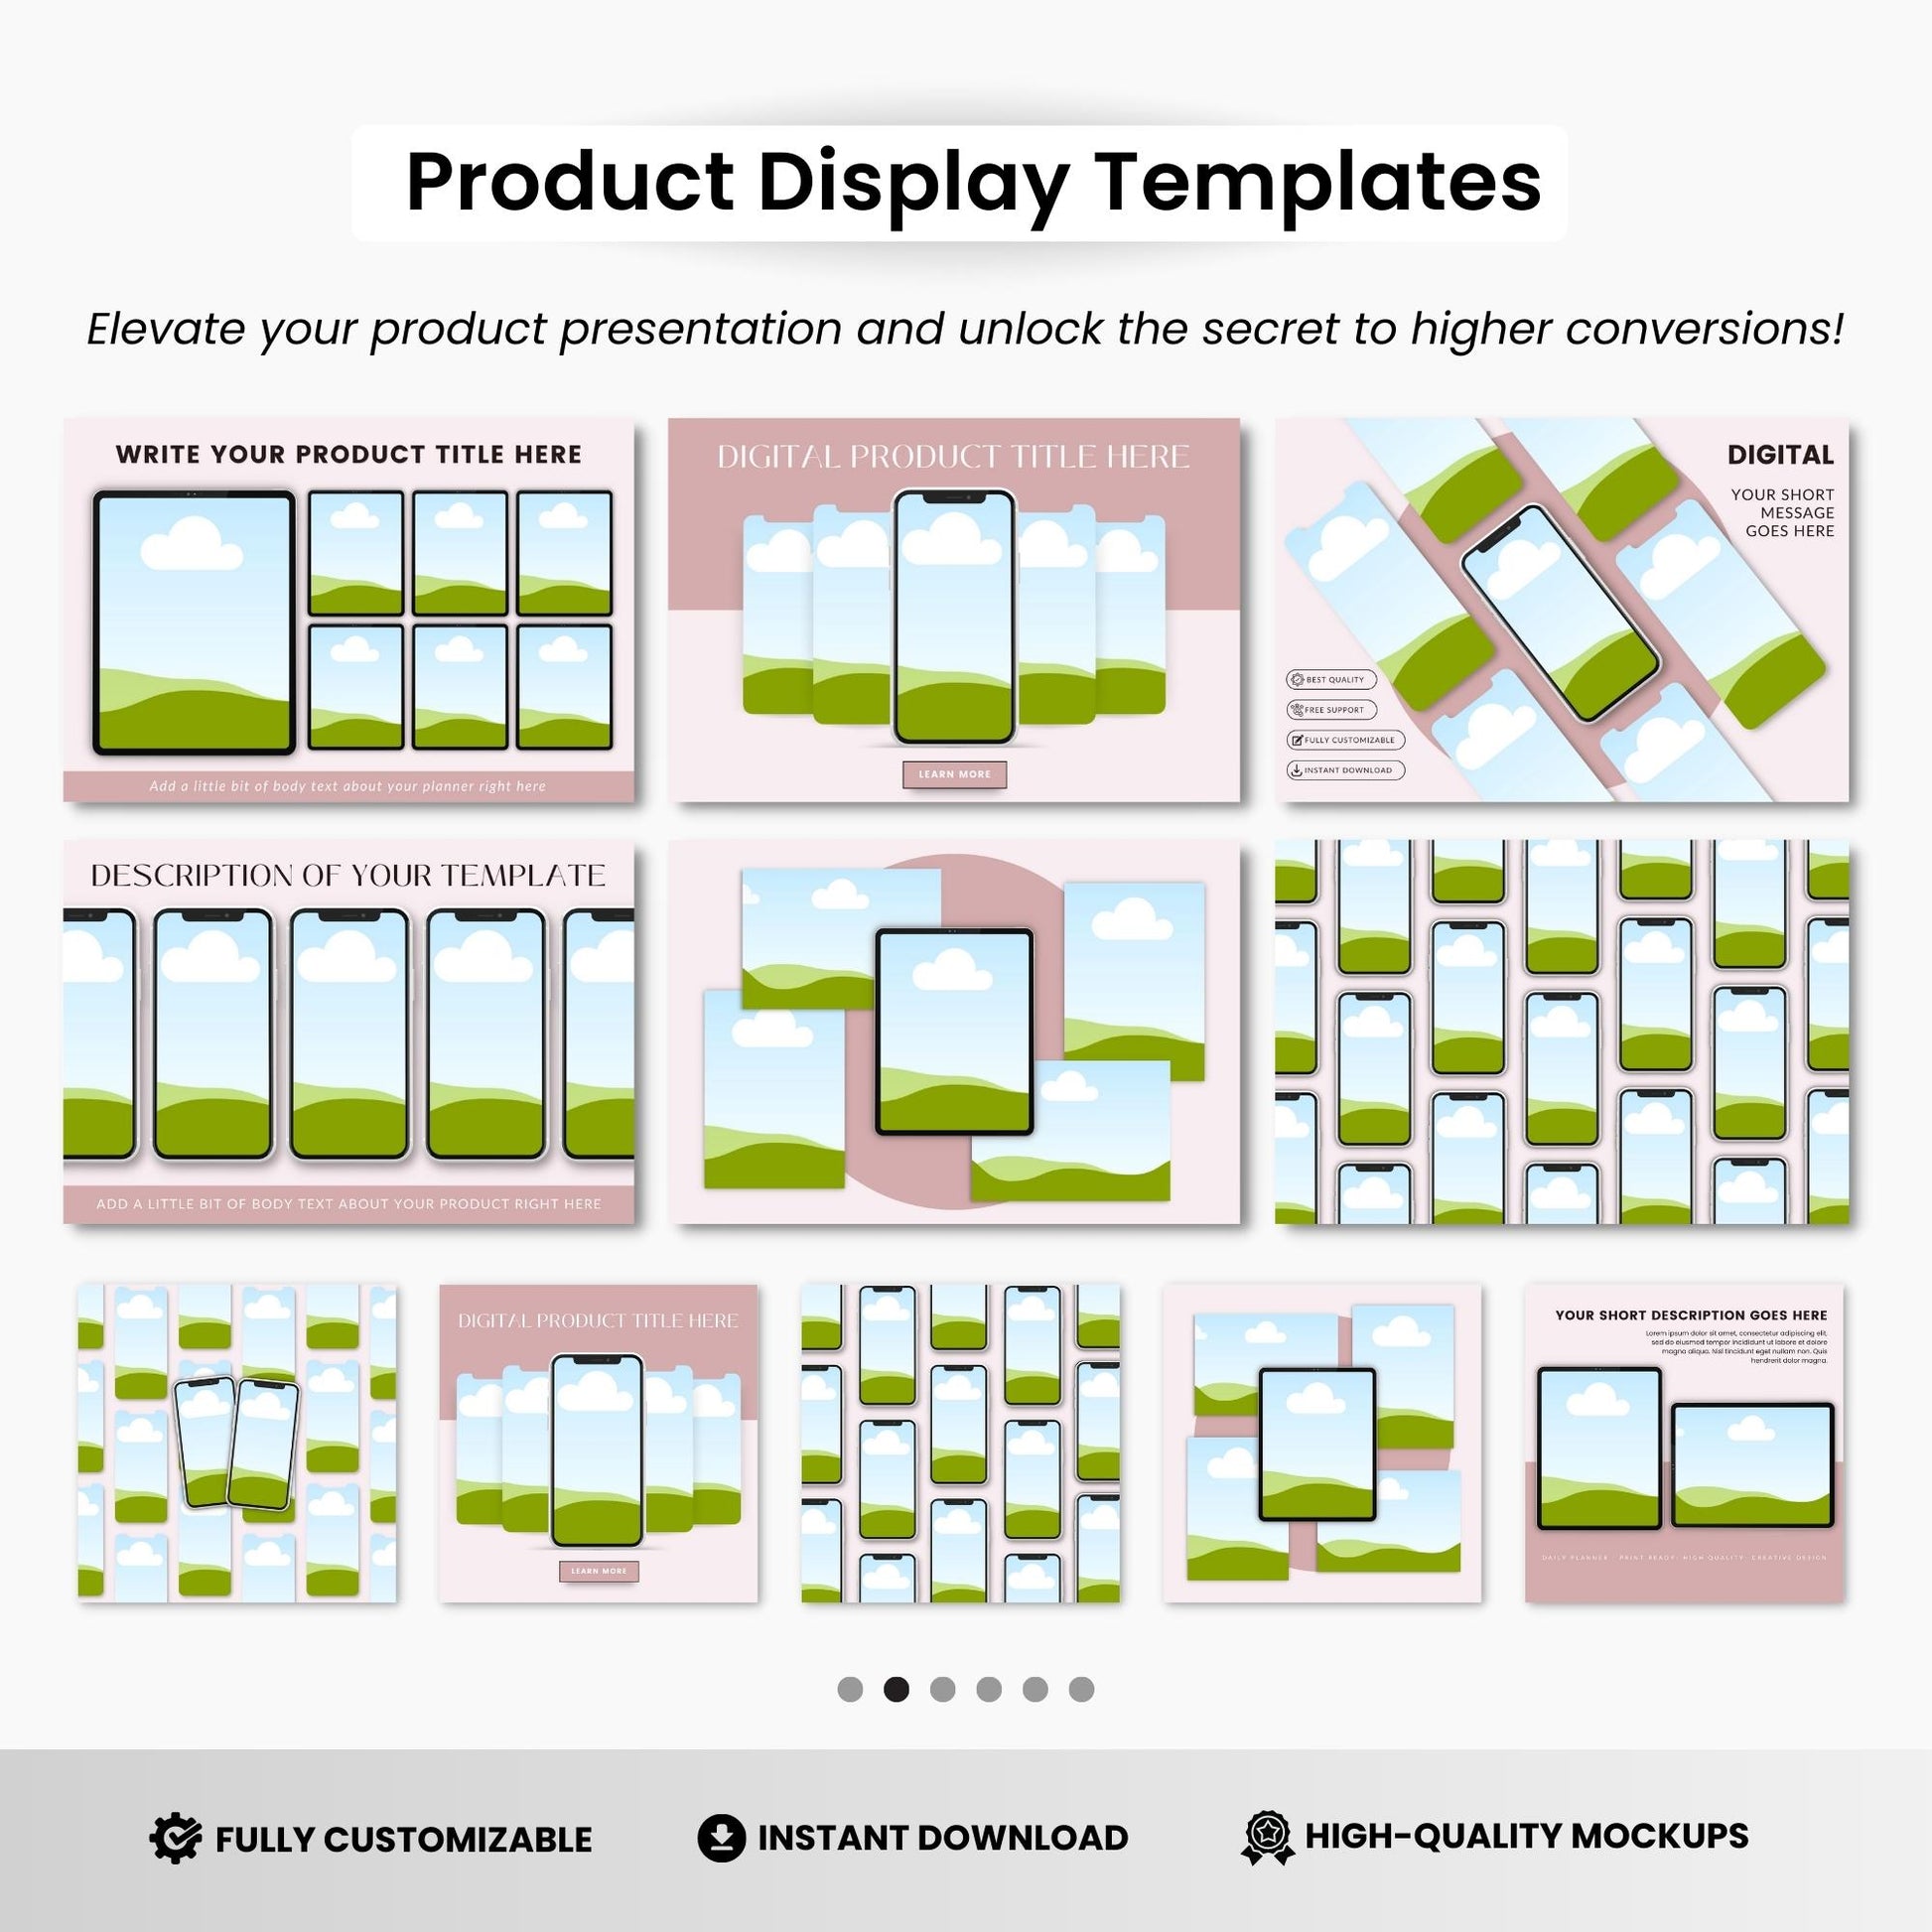 Digital Products Mockup Templates White Devices DigiPax